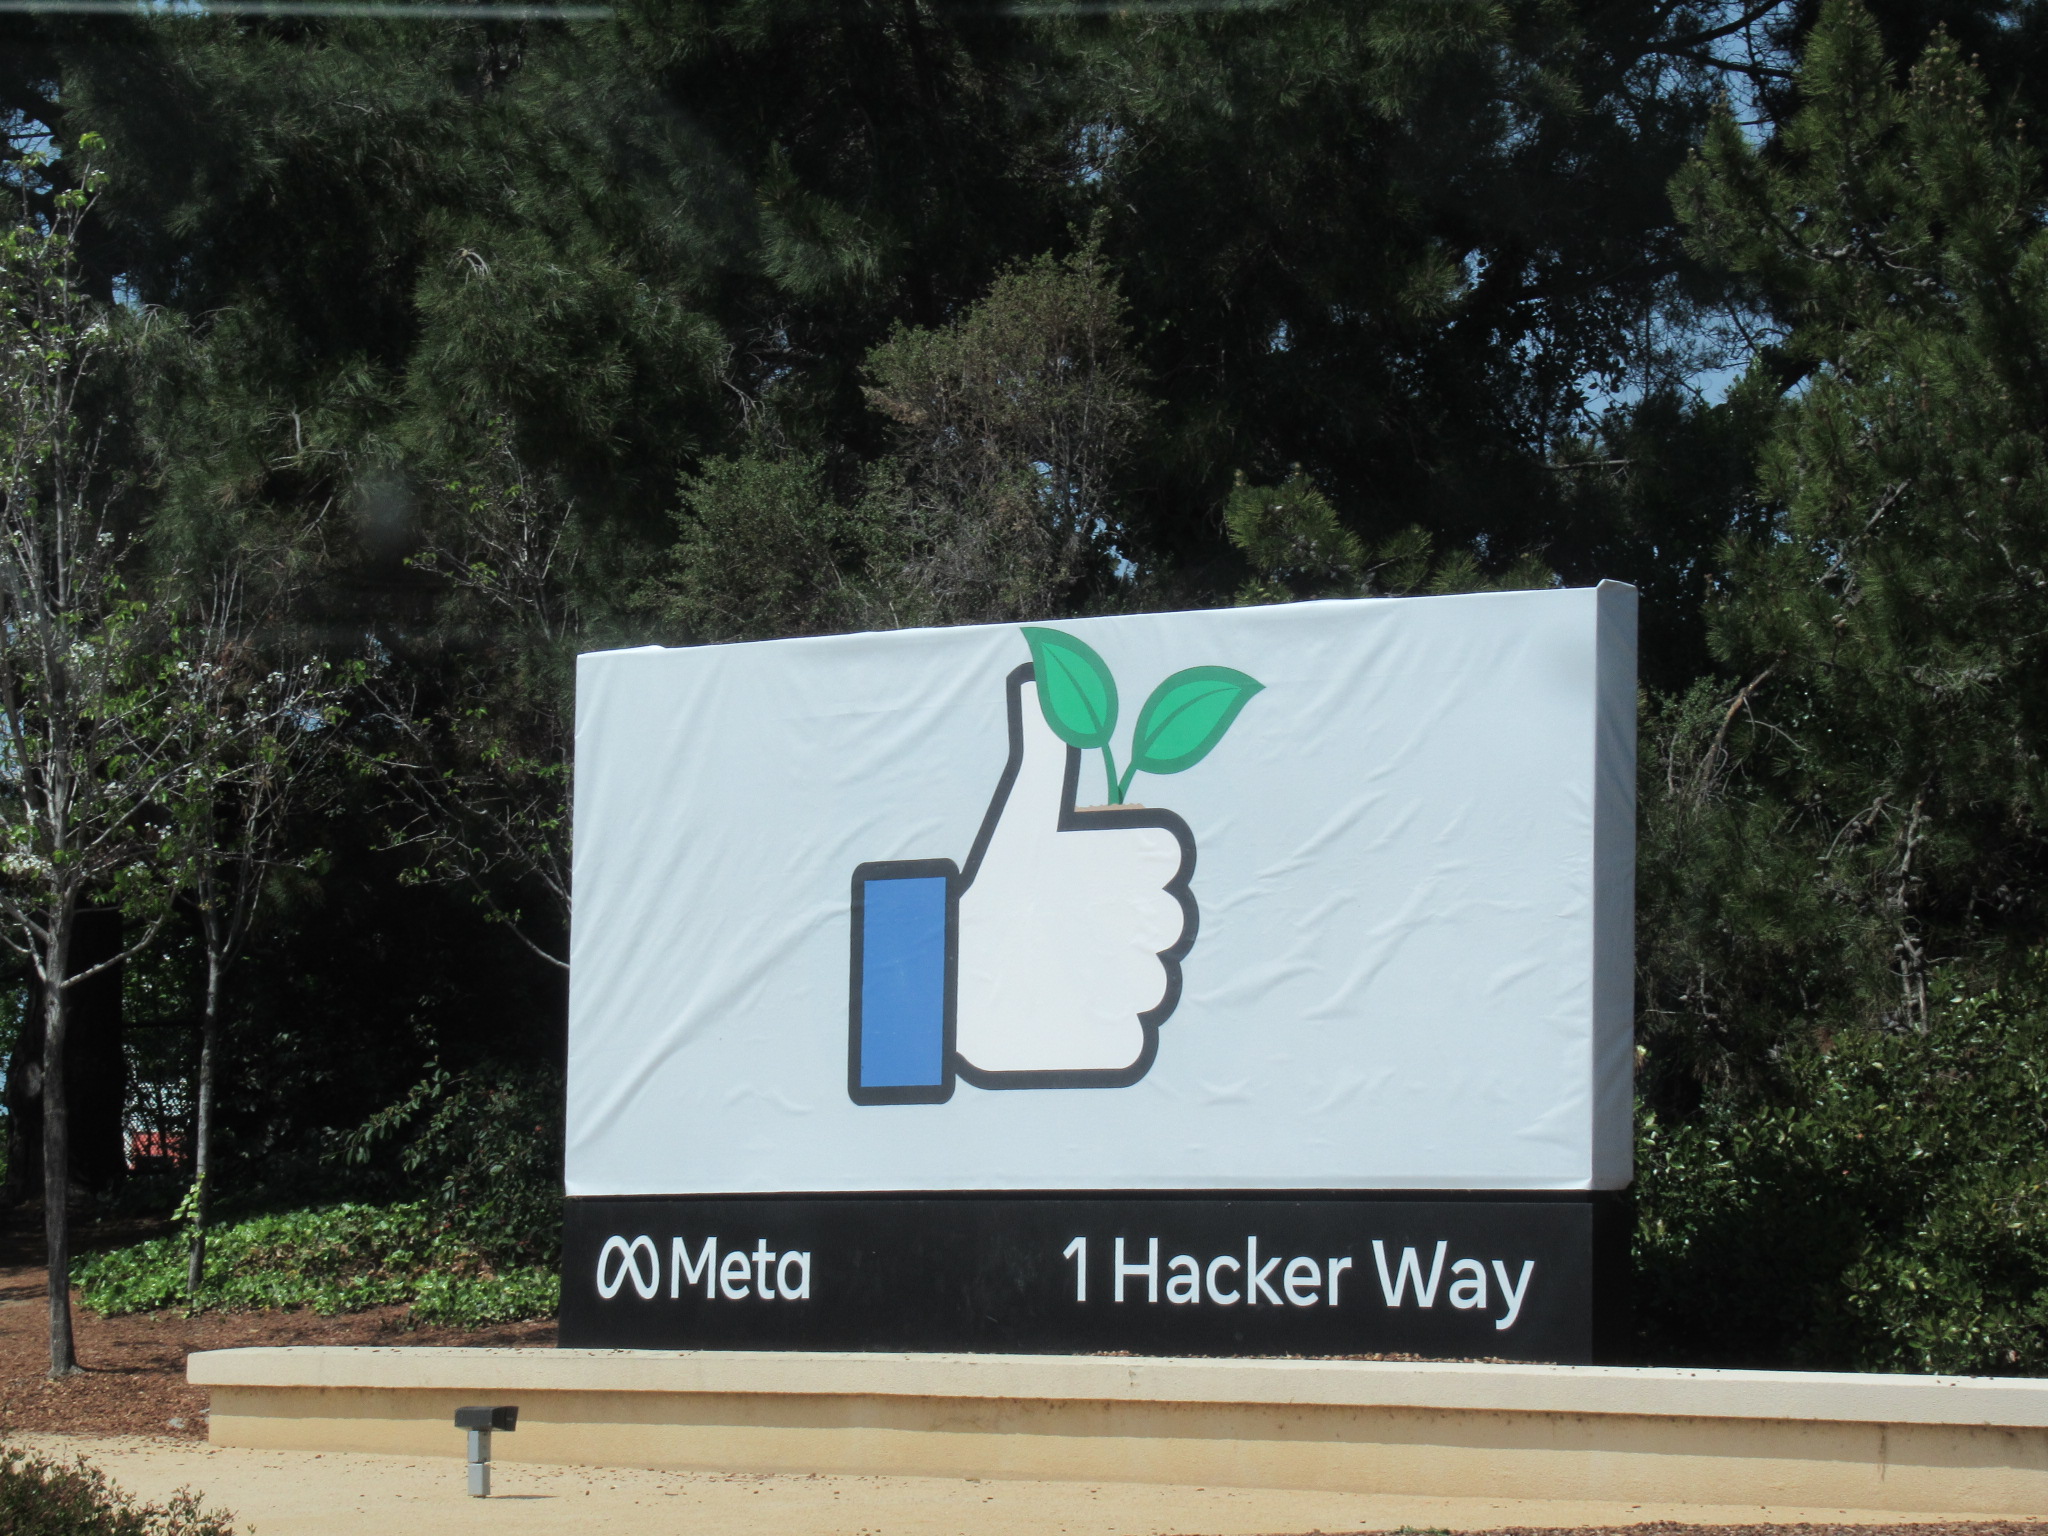 The Meta Platforms (FB) company placard changed from the infinity symbol to the familiar thumbs up...at least for today. The additional basil leaf is a mystery to me.